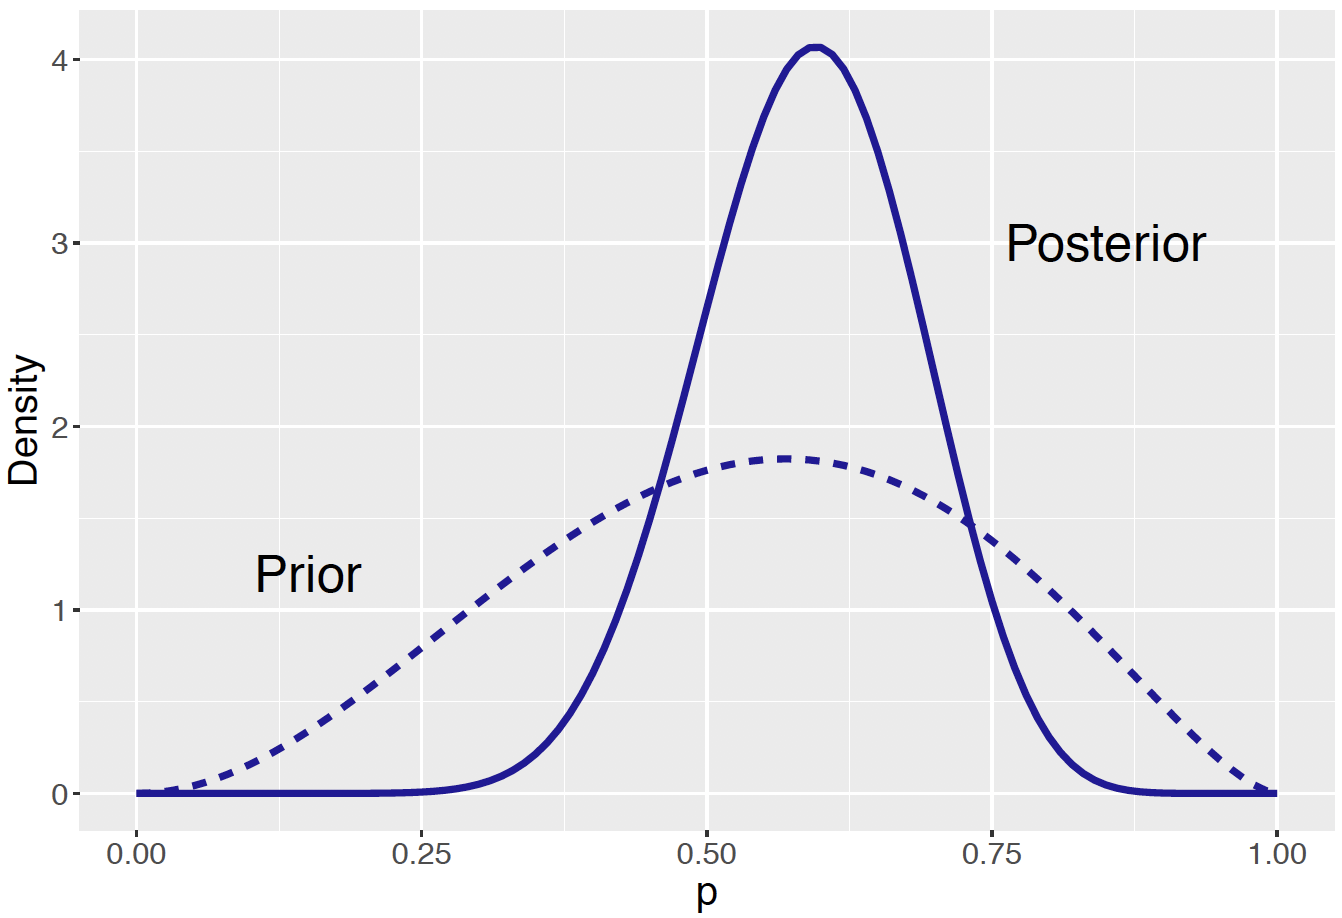 Prior and posterior curves for the proportion of students who prefer to dine out on Friday.